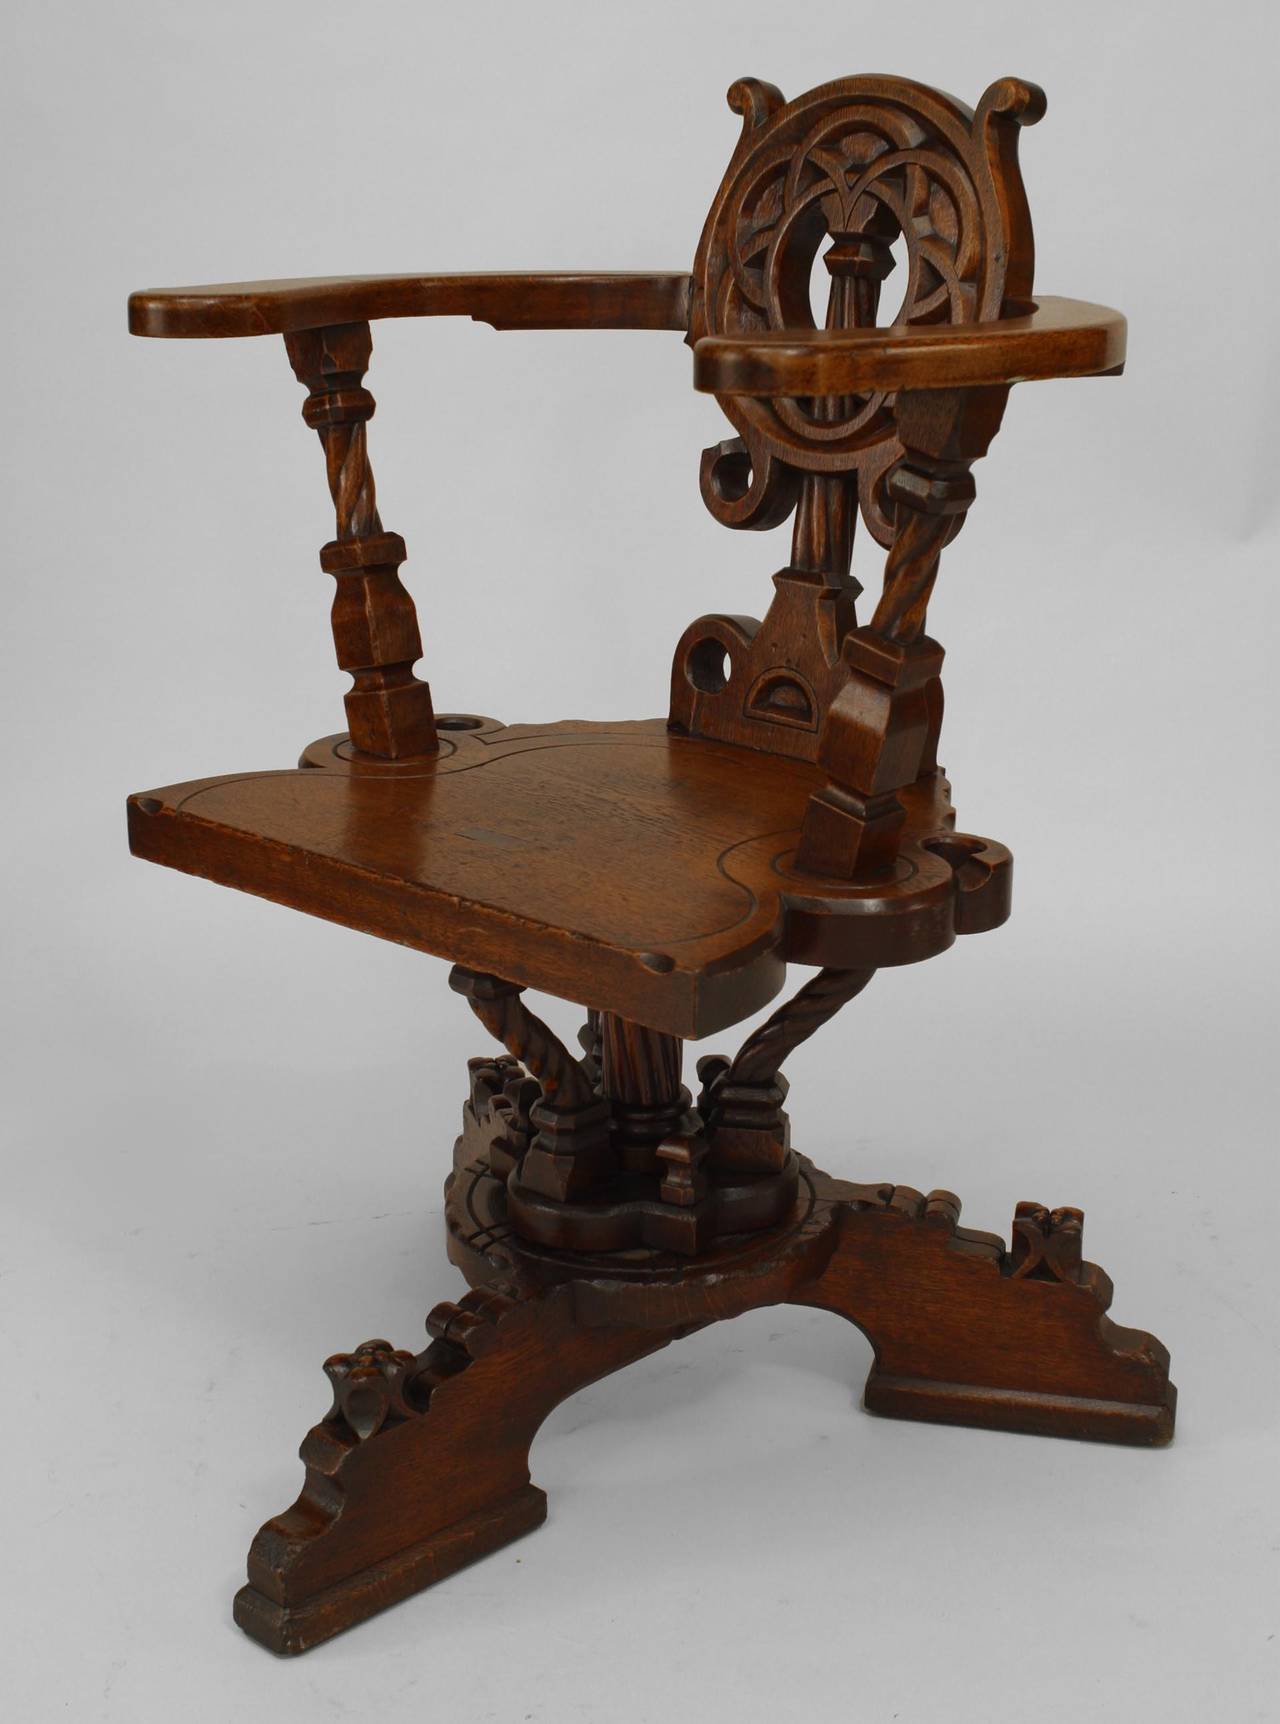 German or English Arts and Crafts oak circle back swivel chair featuring elaborate, Medieval-inspired carved motifs and the brand 